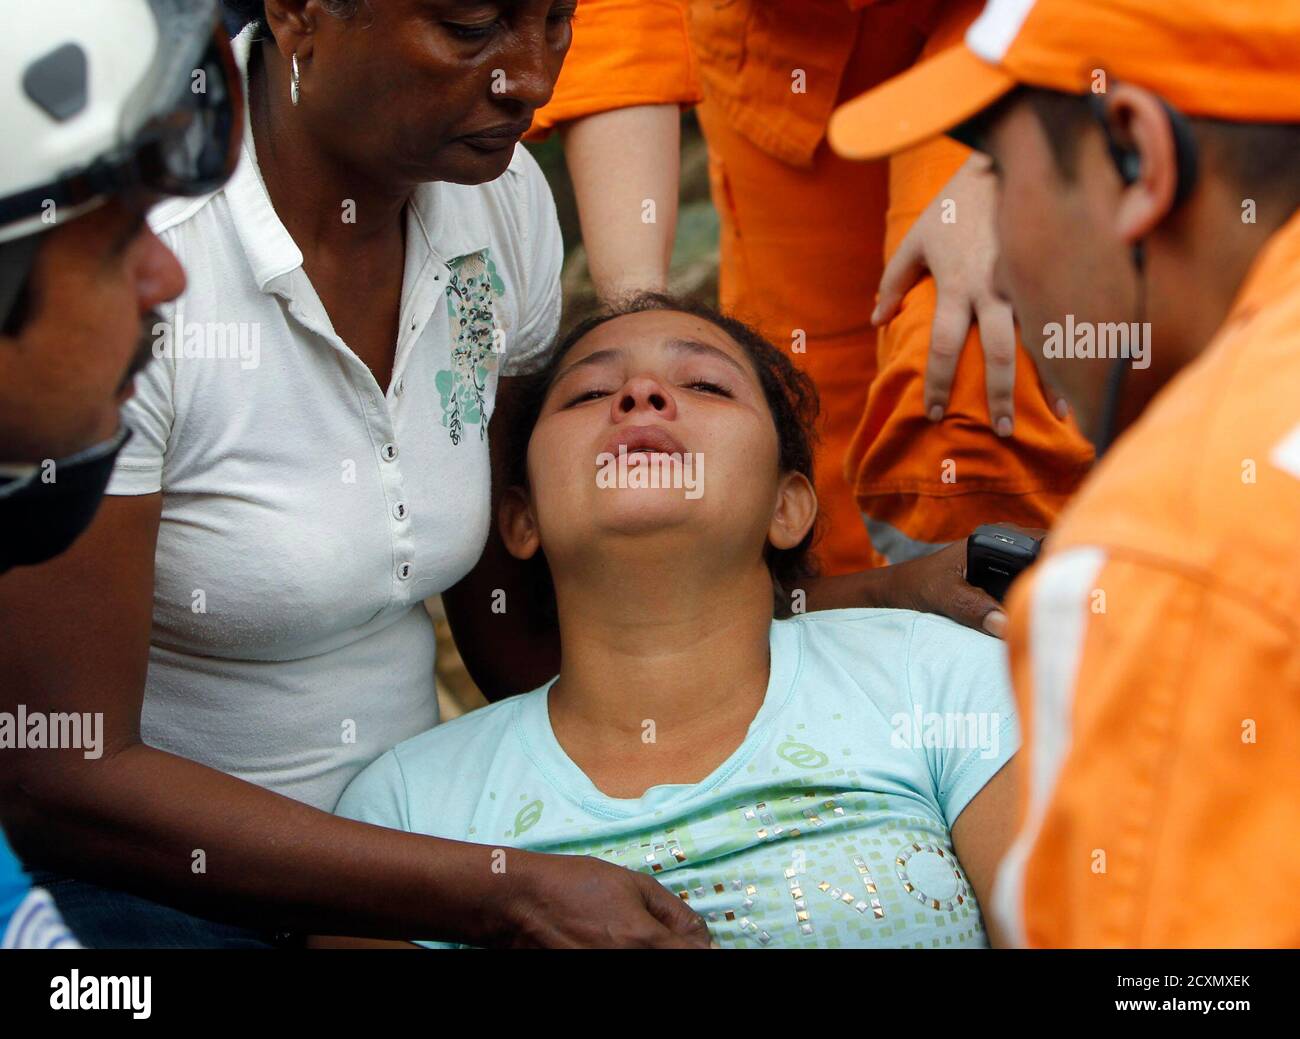 Katerine Zapata, wife of miner Jorge lara, cries upon hearing news of his  death after an explosion at the coal mine "La Preciosa" in Norte de  Santander province, Sardinata January 26, 2011.